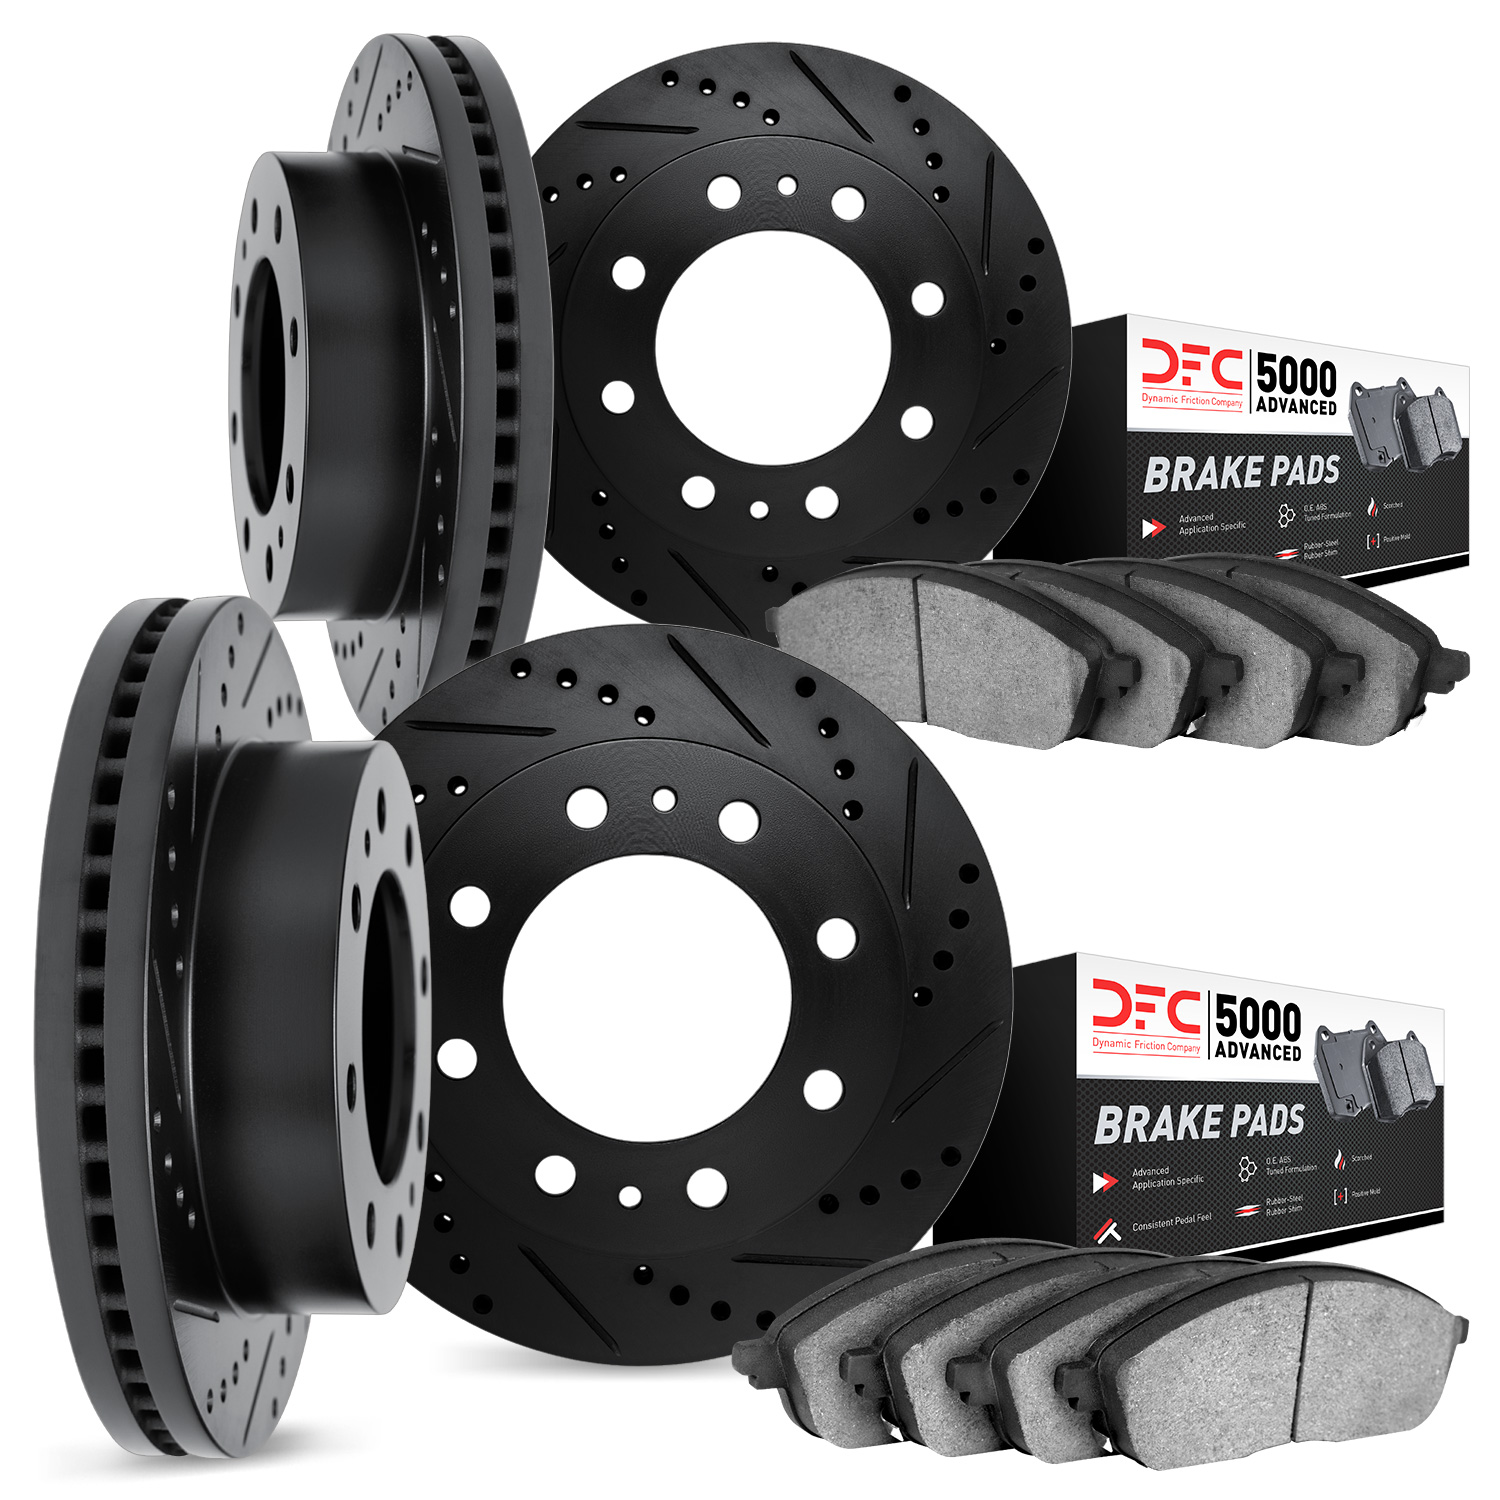 8504-48032 Drilled/Slotted Brake Rotors w/5000 Advanced Brake Pads Kit [Black], 2003-2008 GM, Position: Front and Rear